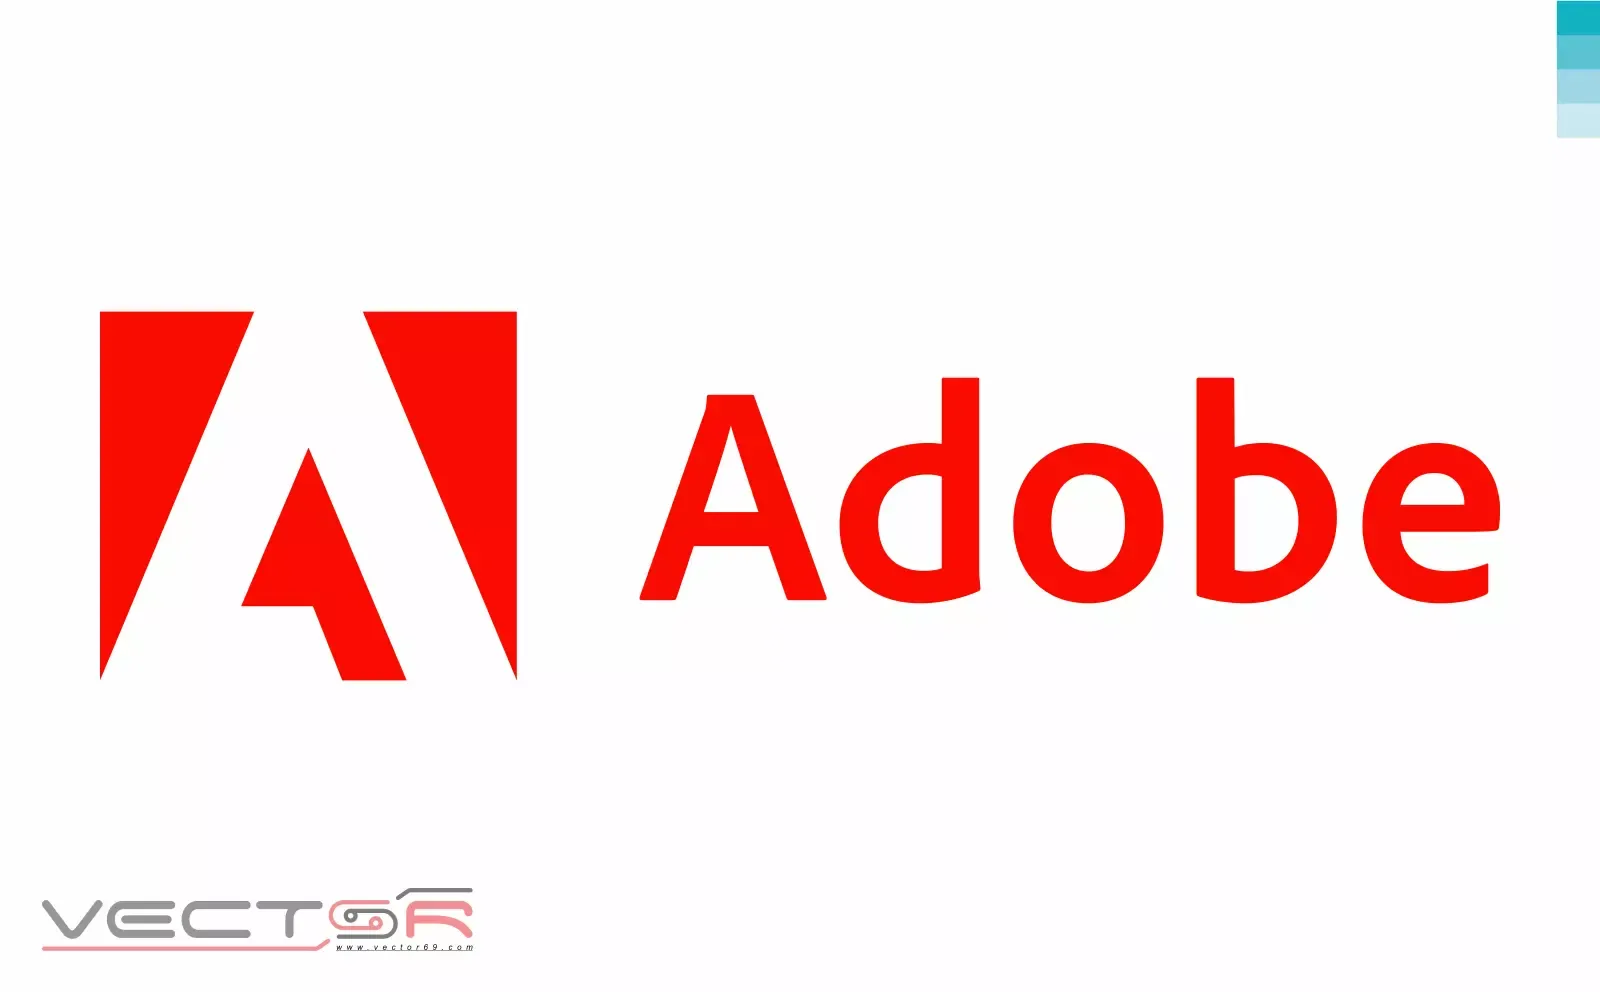 Adobe (2020) Logo - Download Vector File SVG (Scalable Vector Graphics)